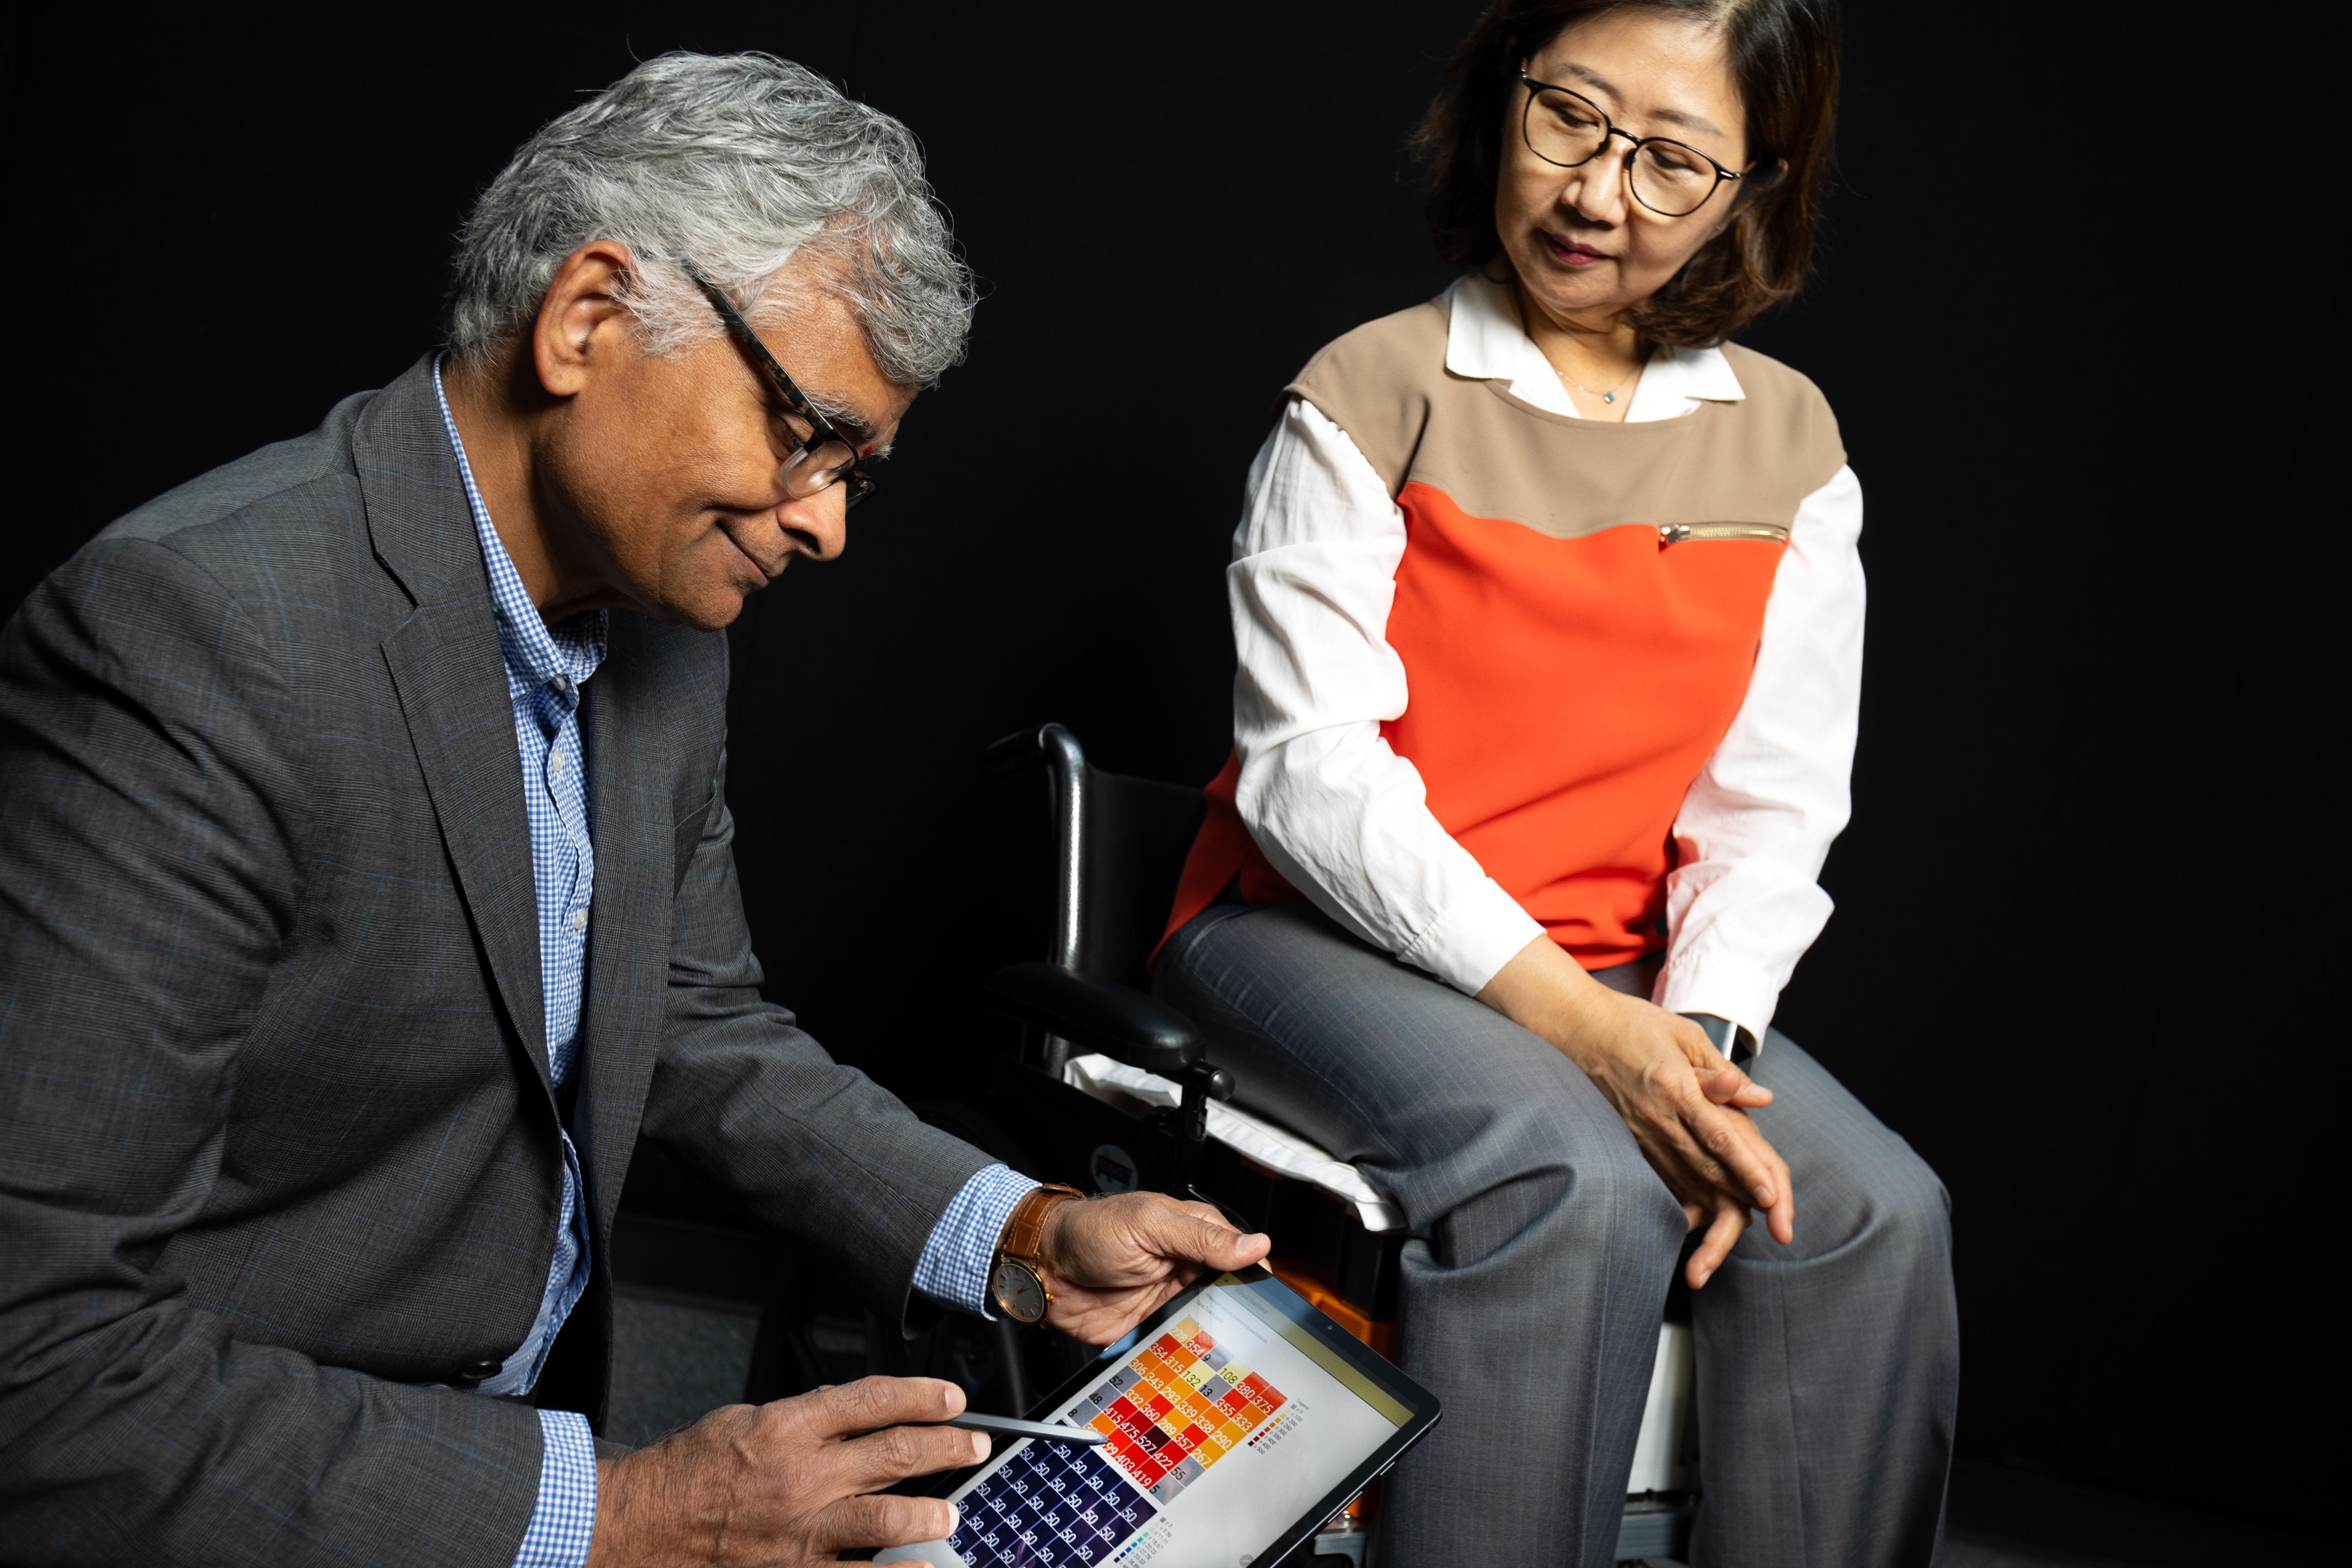   Sundaresan Jayaraman (left) looks at pressure data from fabric sensors he developed with Sungmee Park, who is seated in their prototype wheelchair system. (Photo: Candler Hobbs)